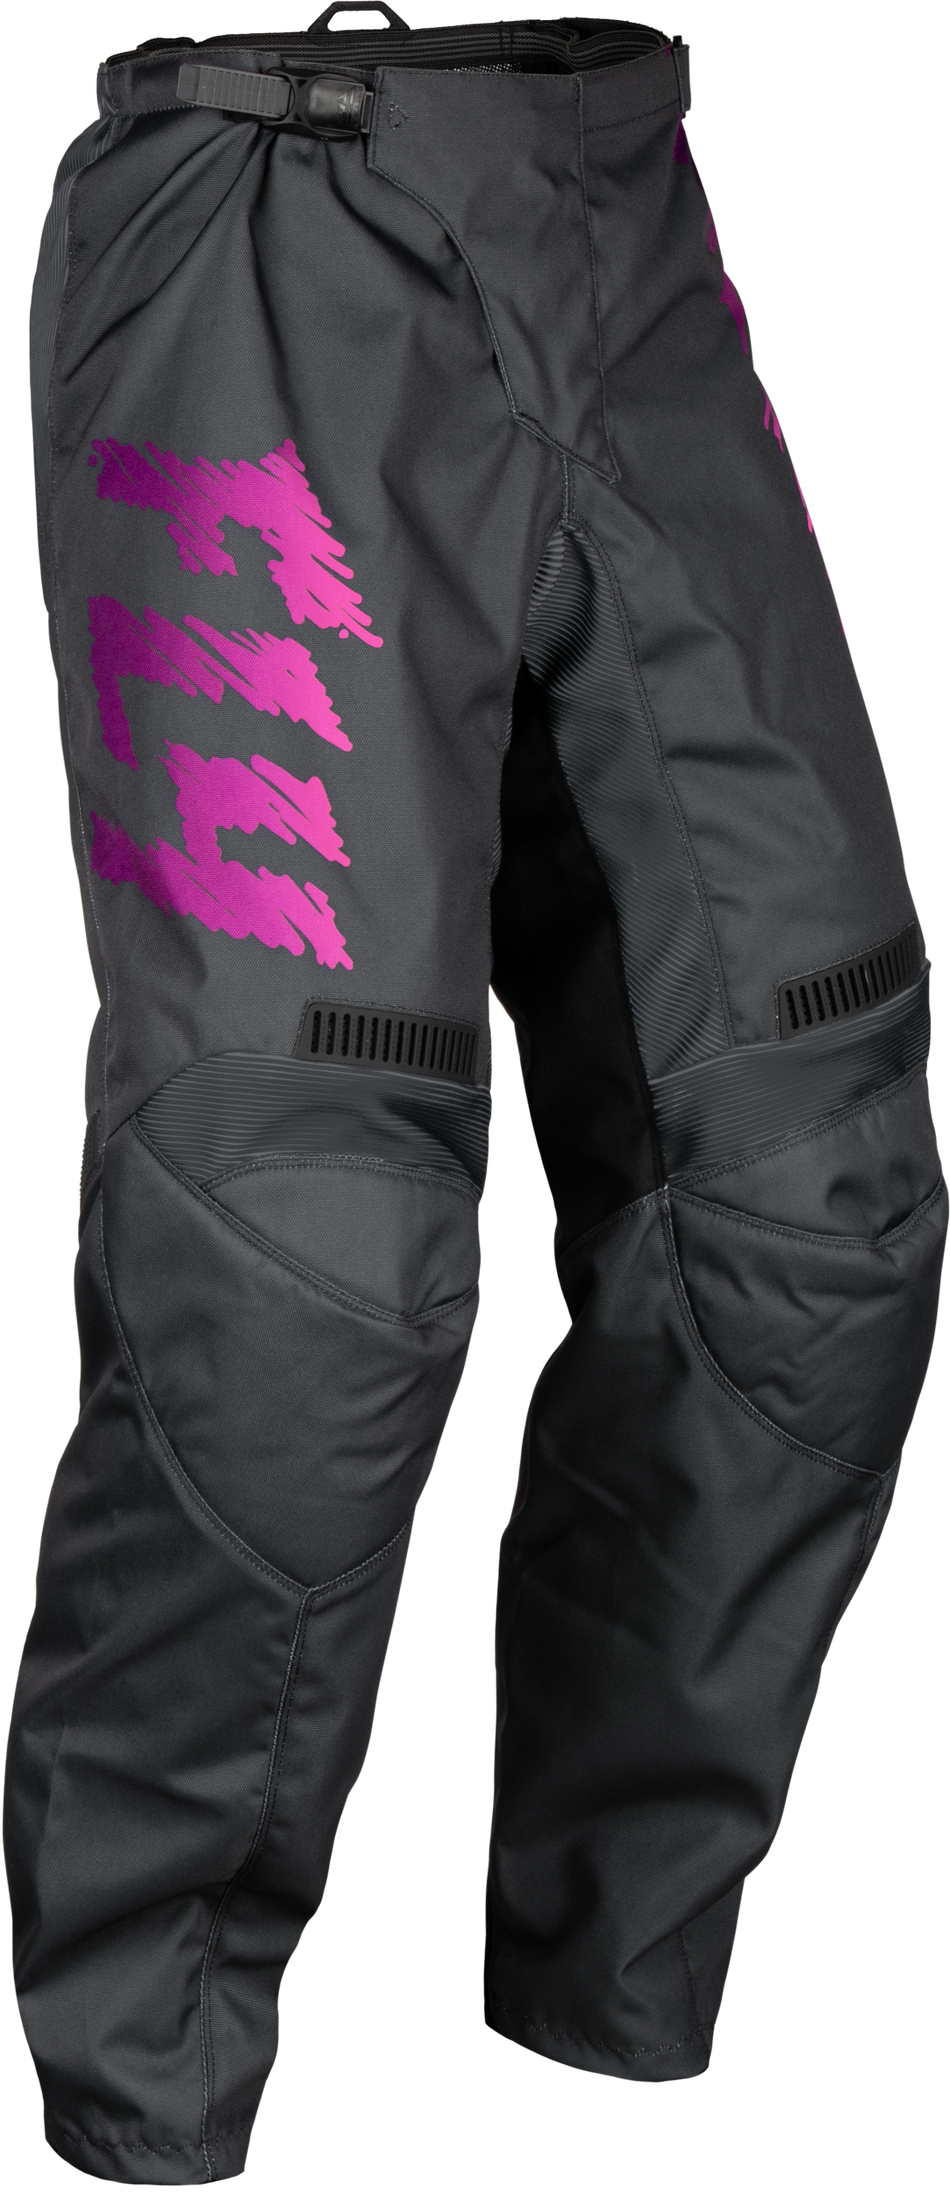 FLY RACING Youth F-16 Pants Grey/Charcoal/Pink Sz 20 377-23020